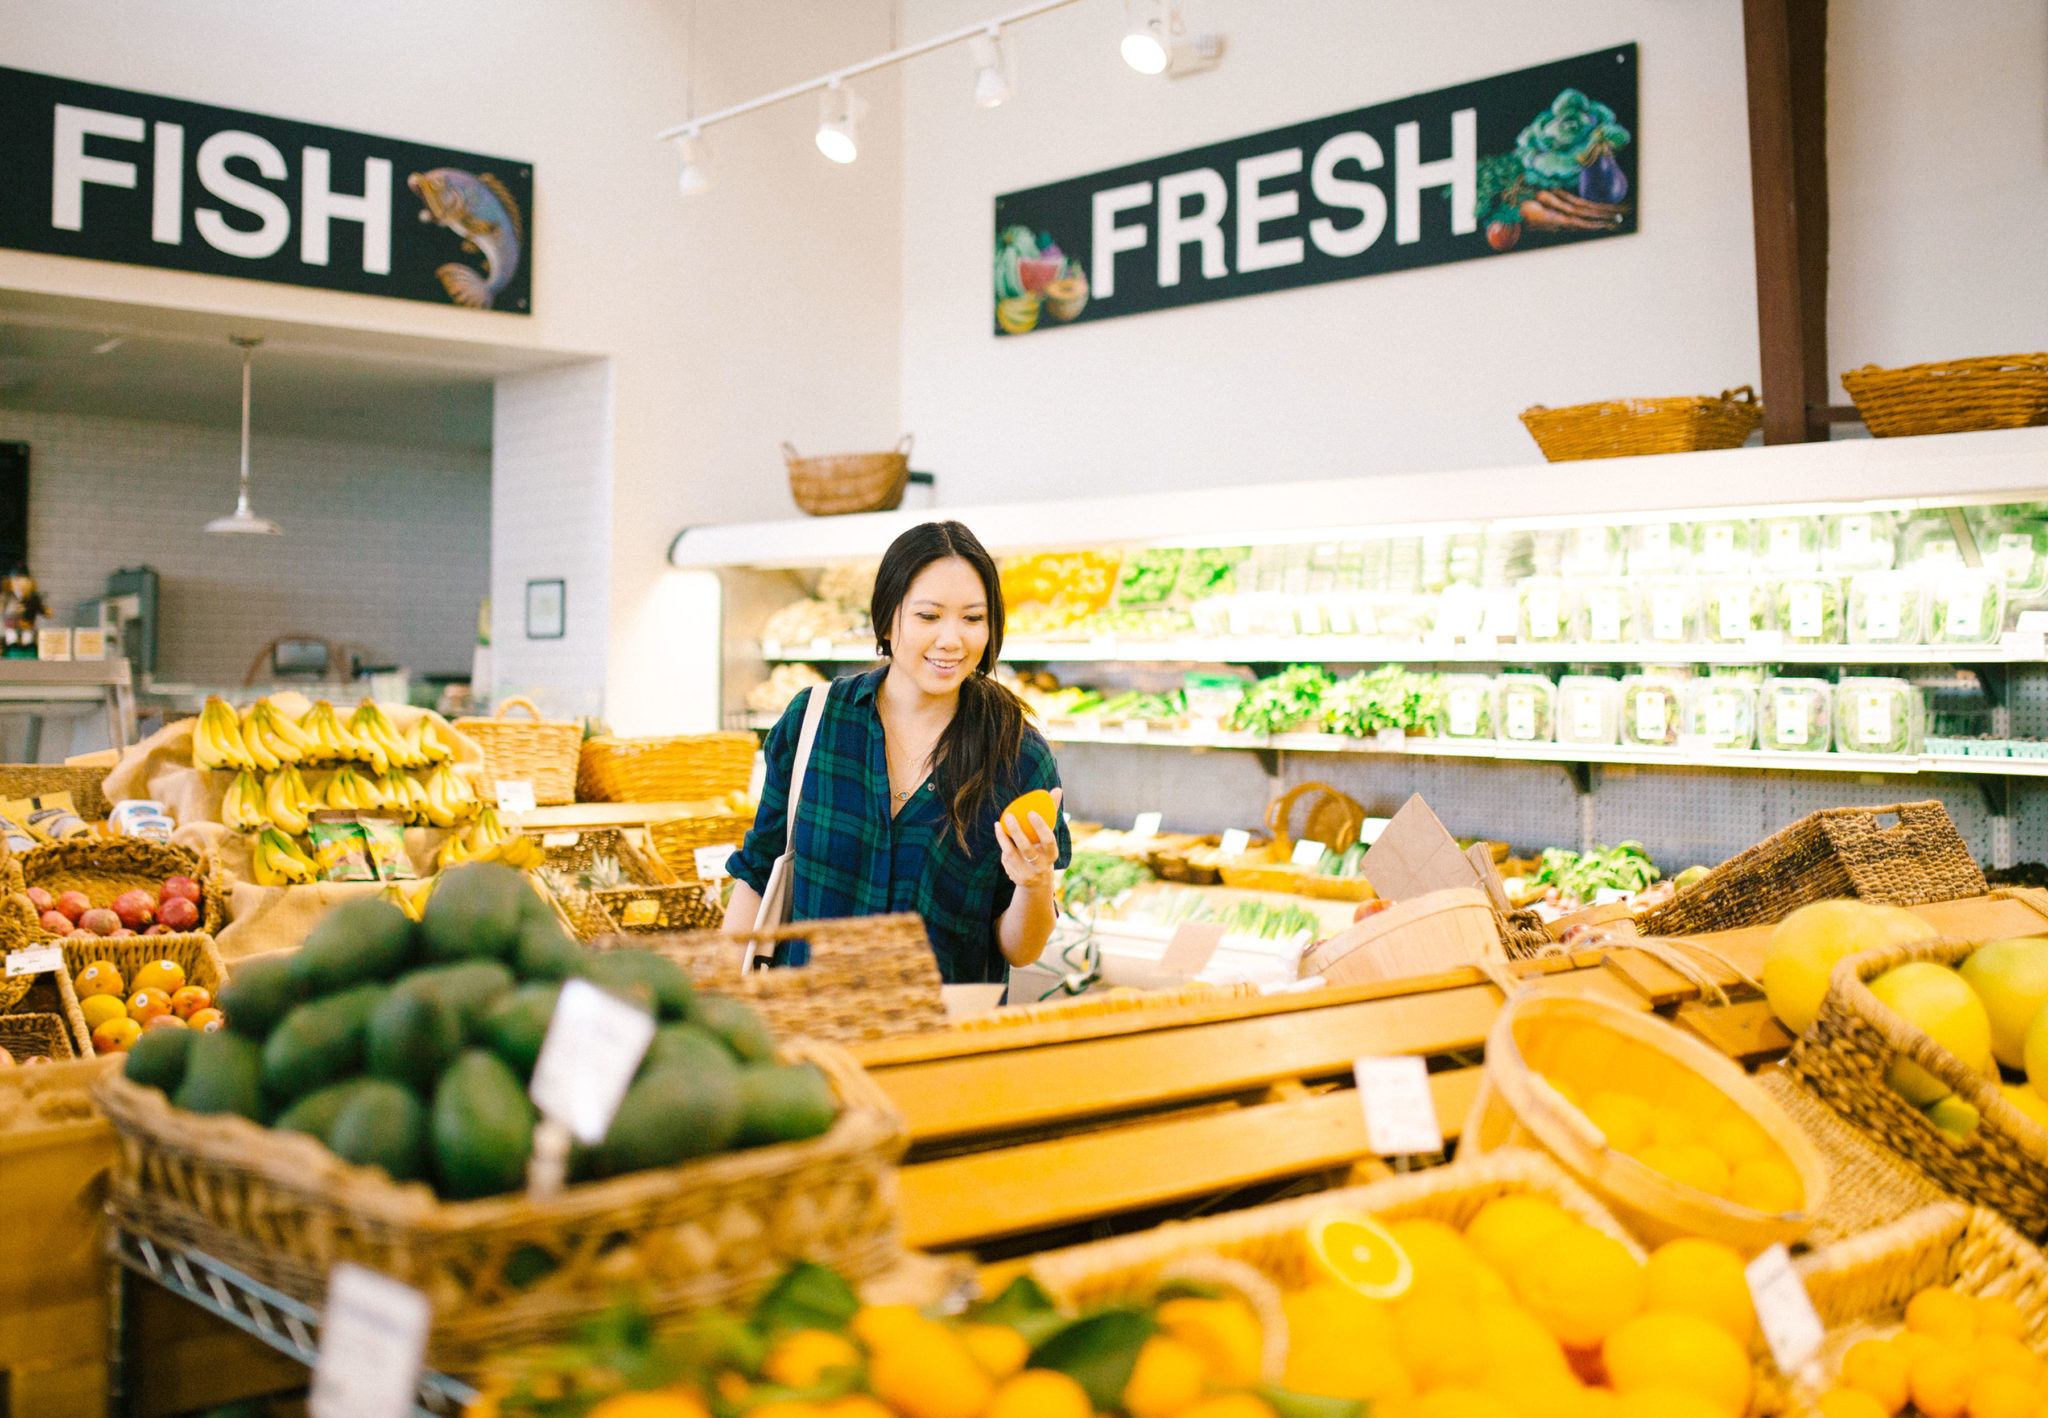 Grocery shopping tips for fresh produce